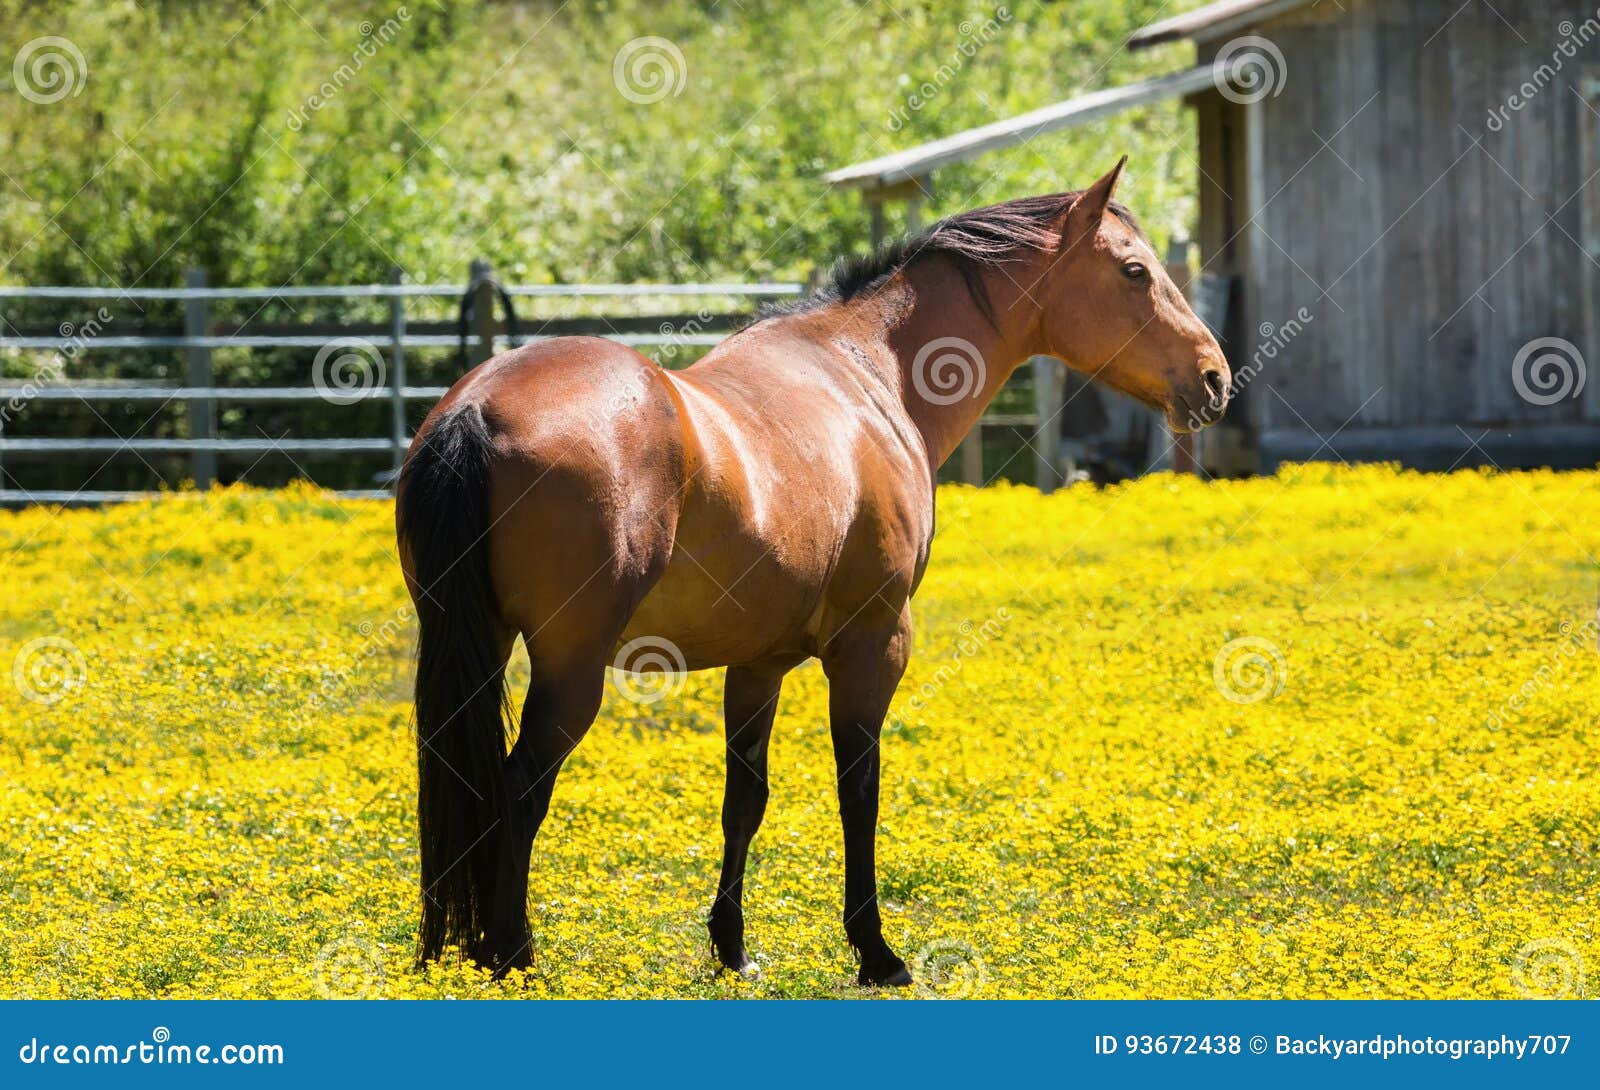 horse at a farm in northern californa